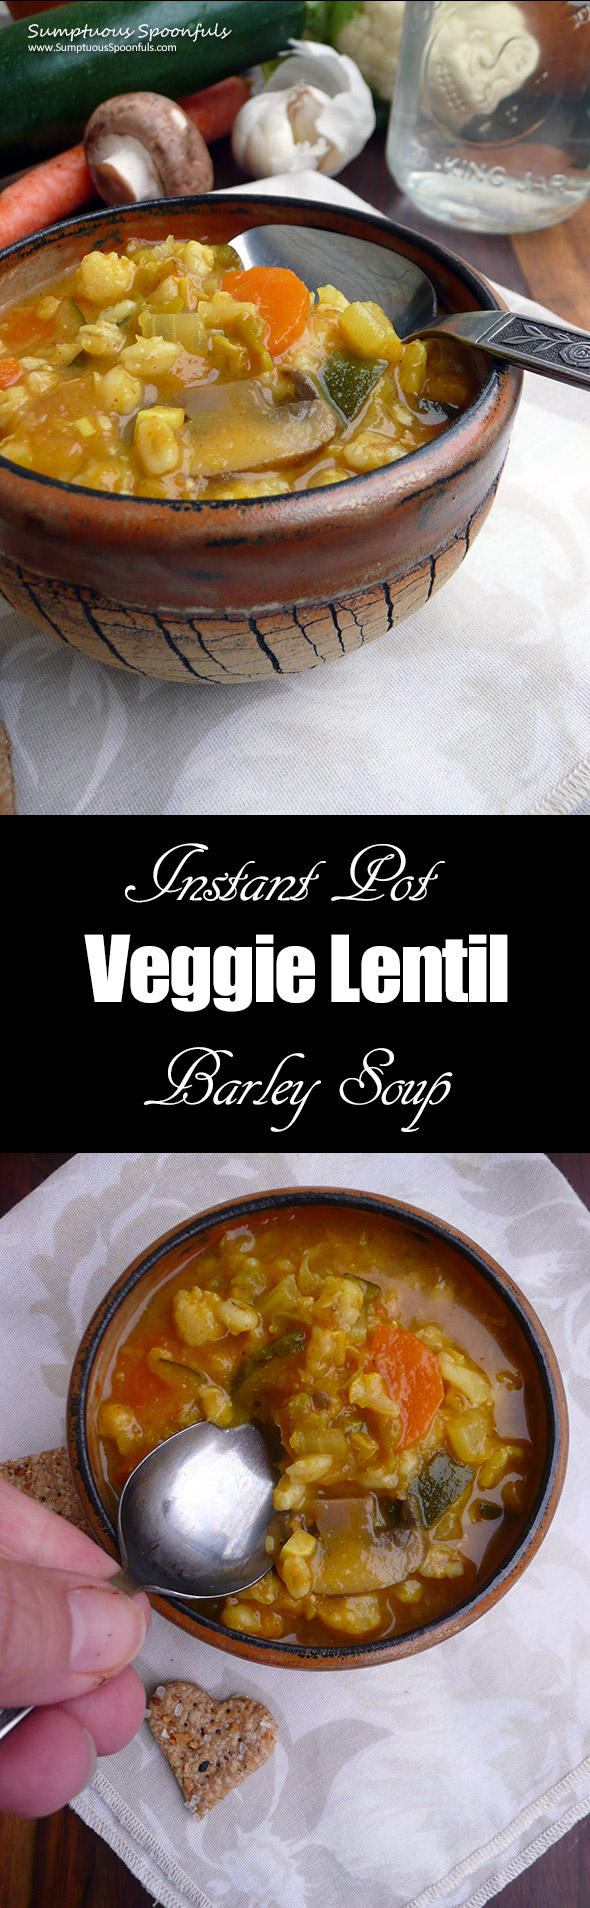 Instant Pot Veggie Lentil Barley Soup ~ hot, hearty & satisfying soup that's ready in a flash! Full of protein, fiber and low in carbs, this soup has it all.